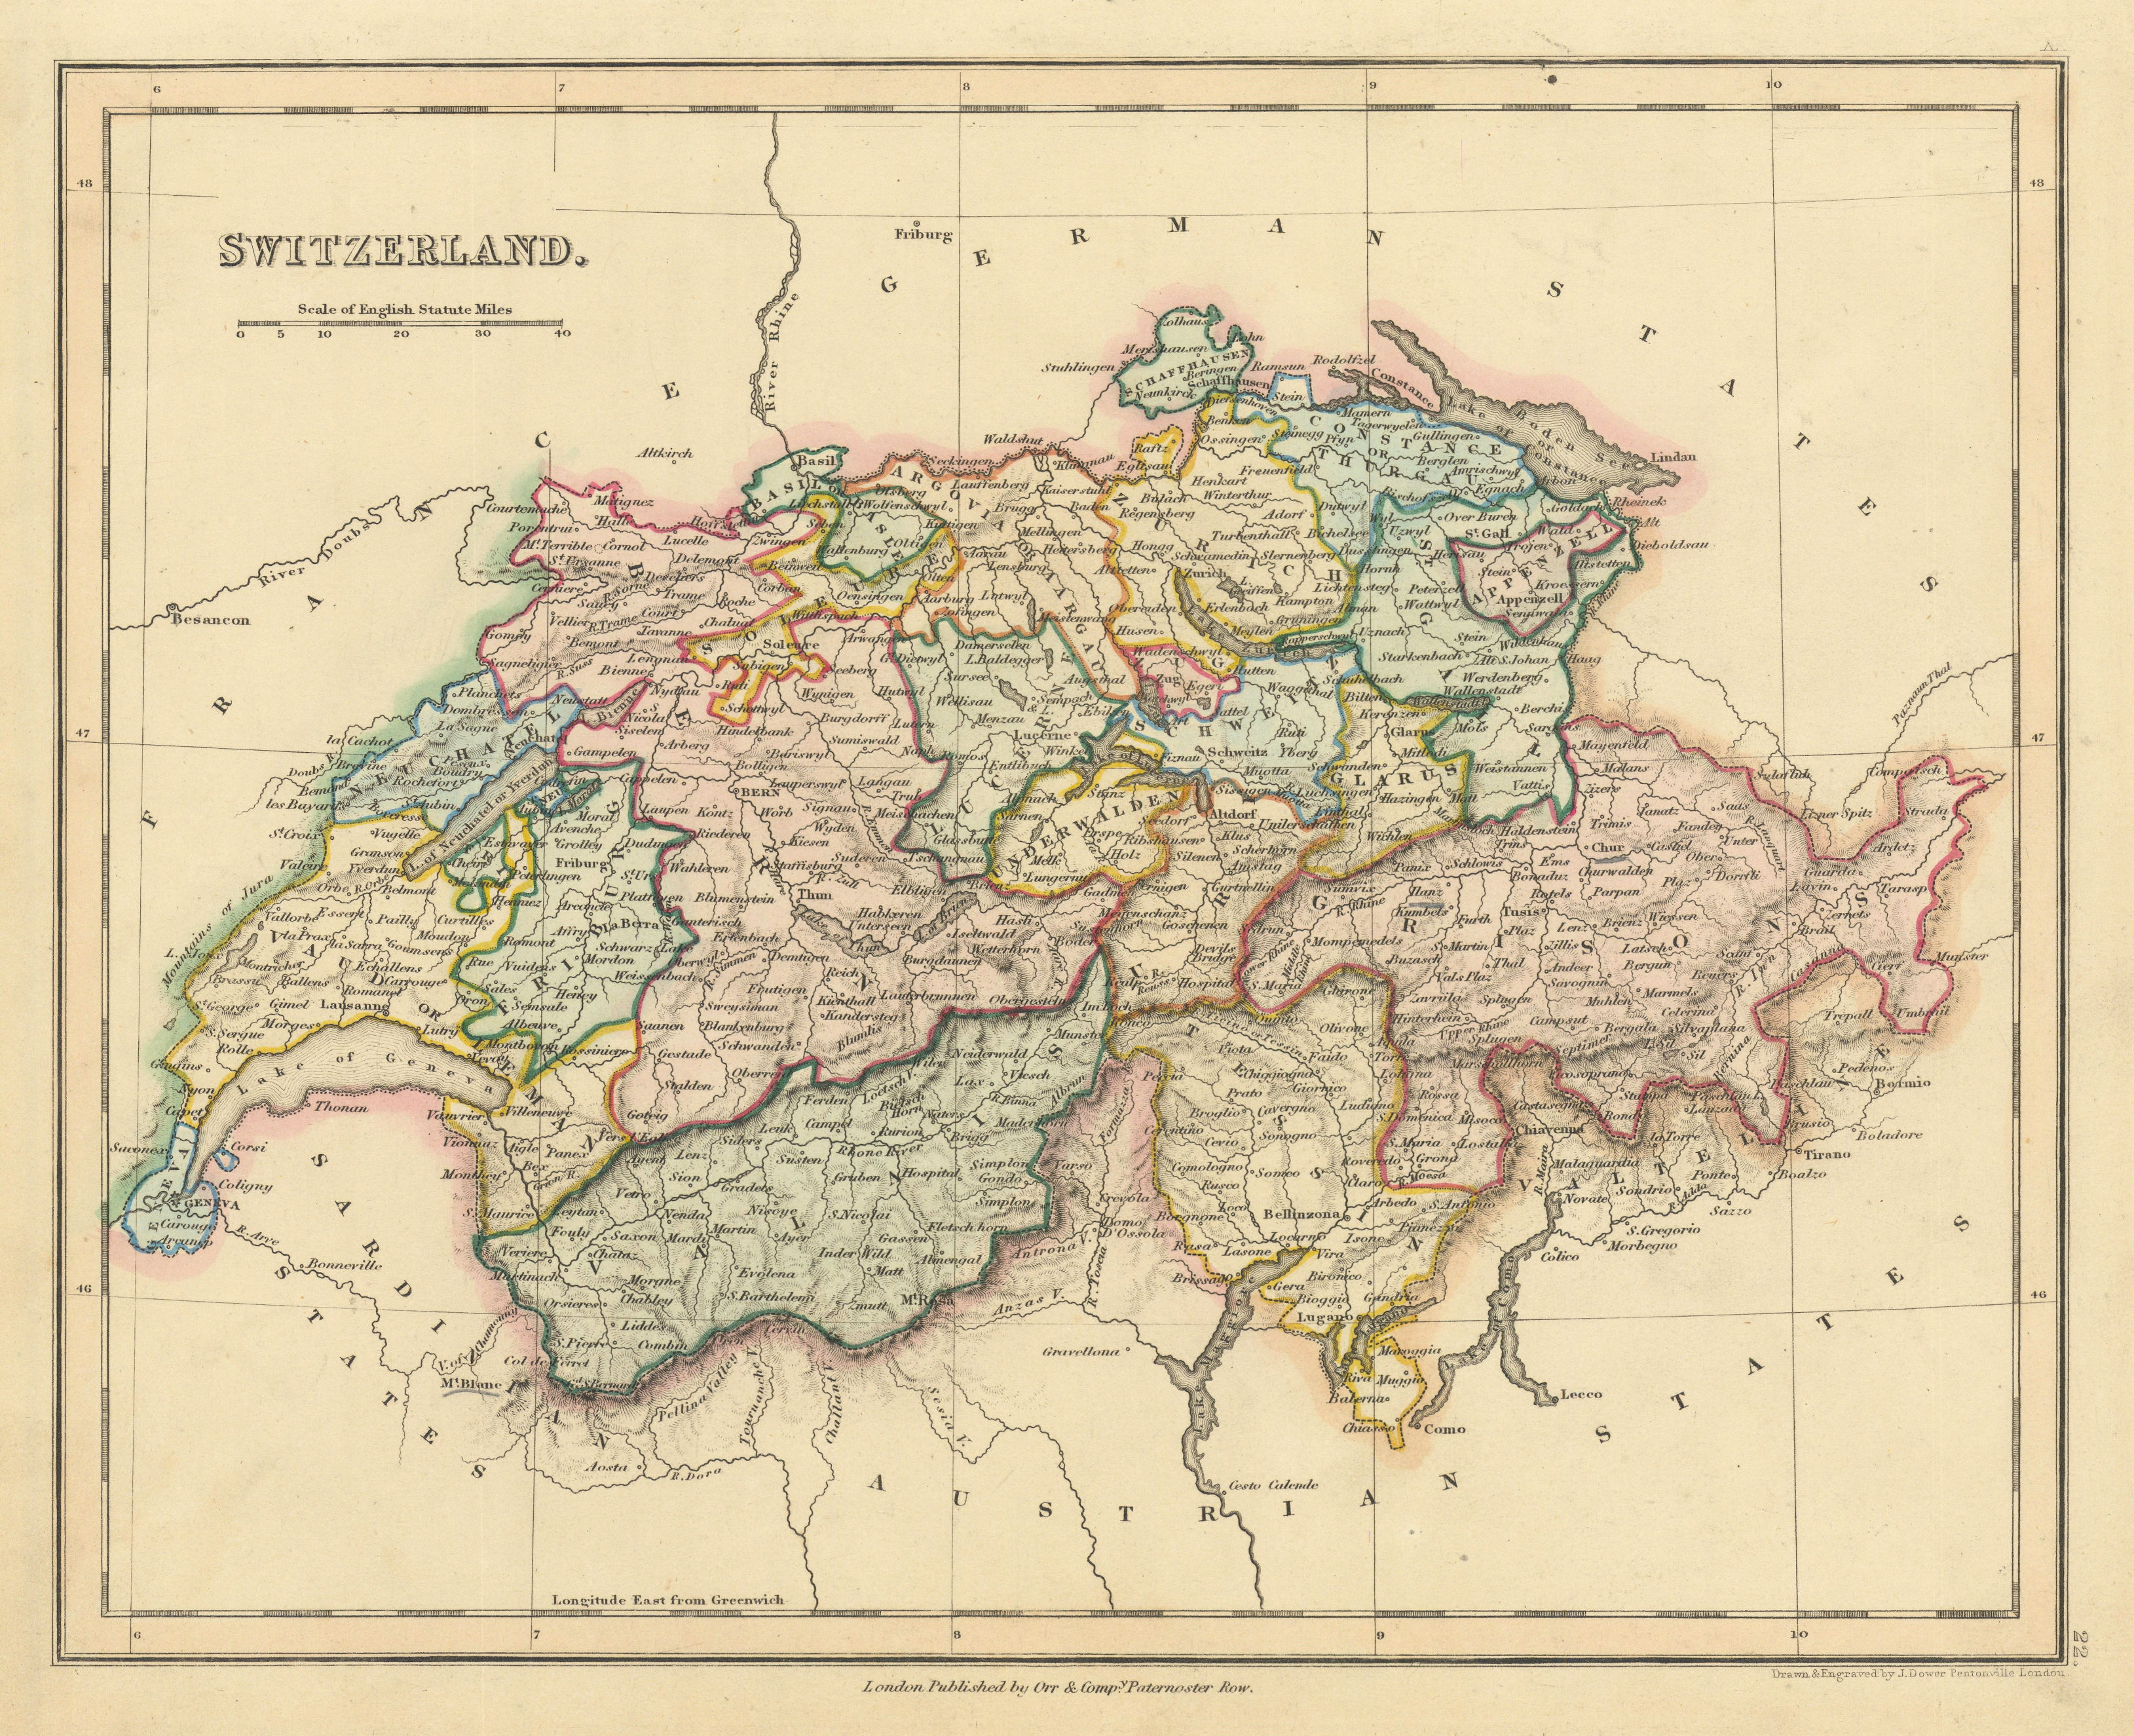 Associate Product Switzerland in cantons by John Dower 1845 old antique vintage map plan chart